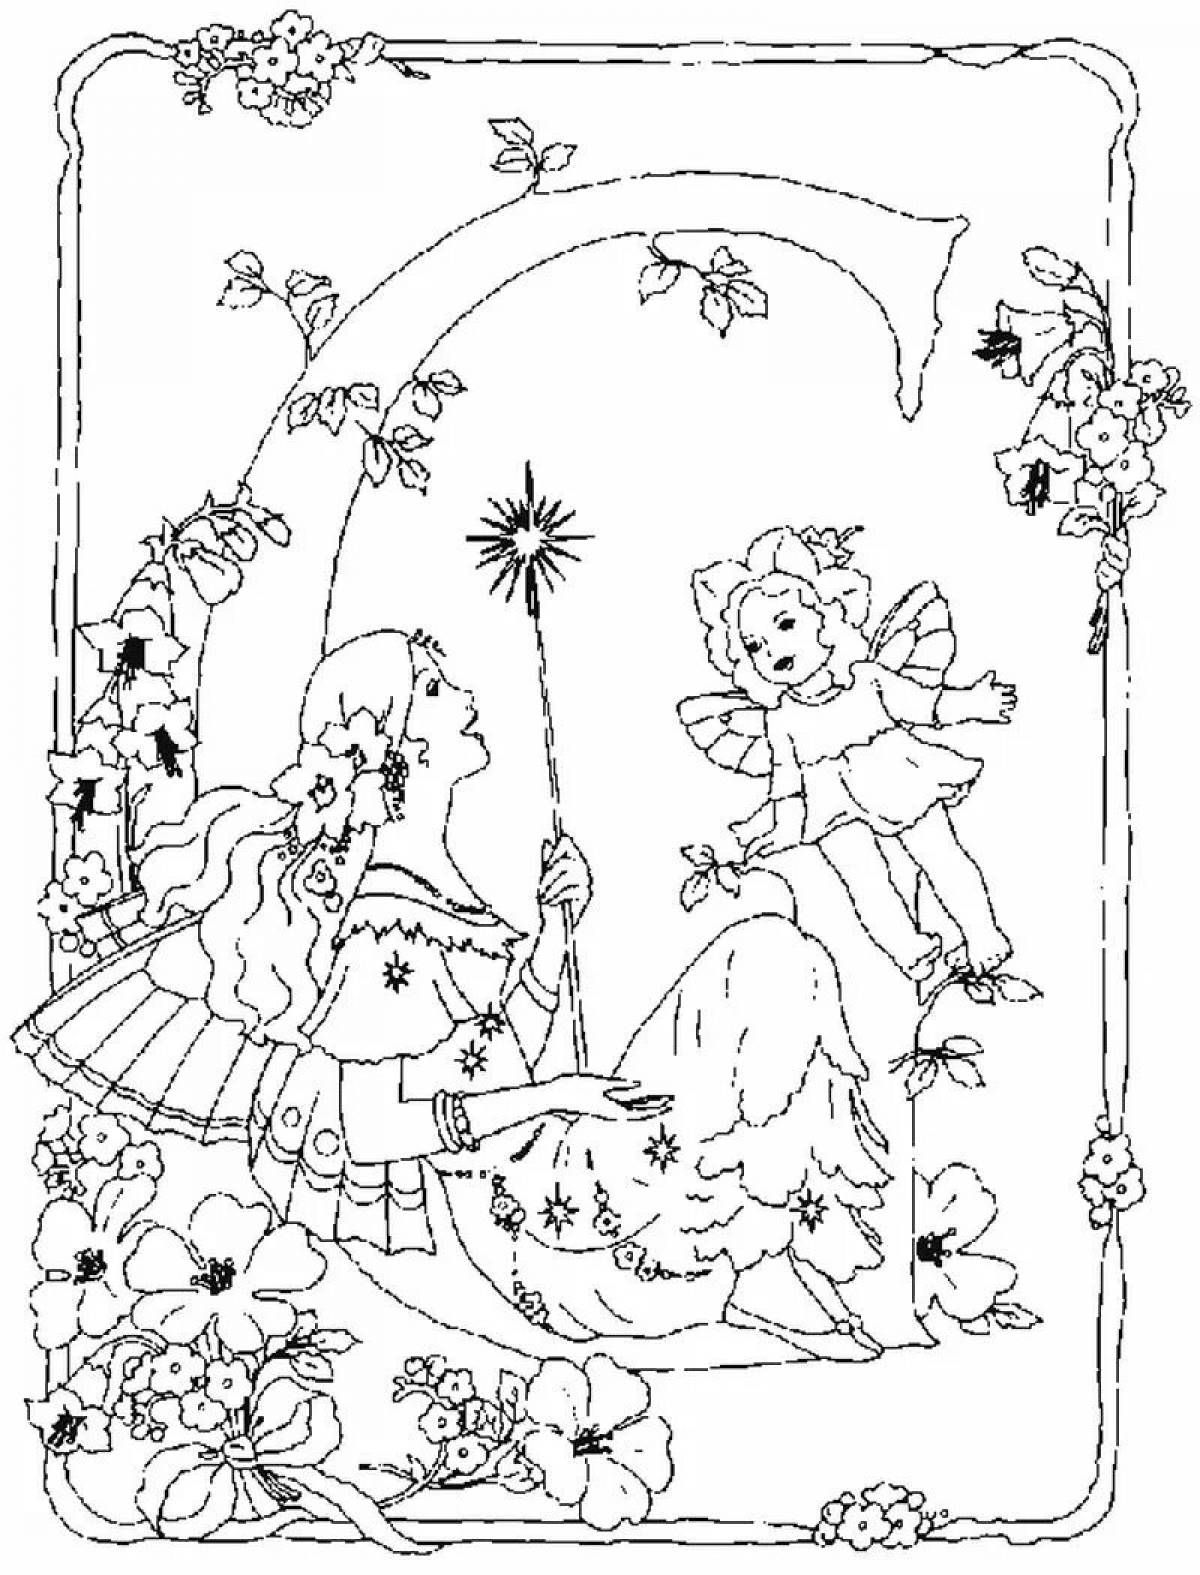 Calming fairy tale coloring pages